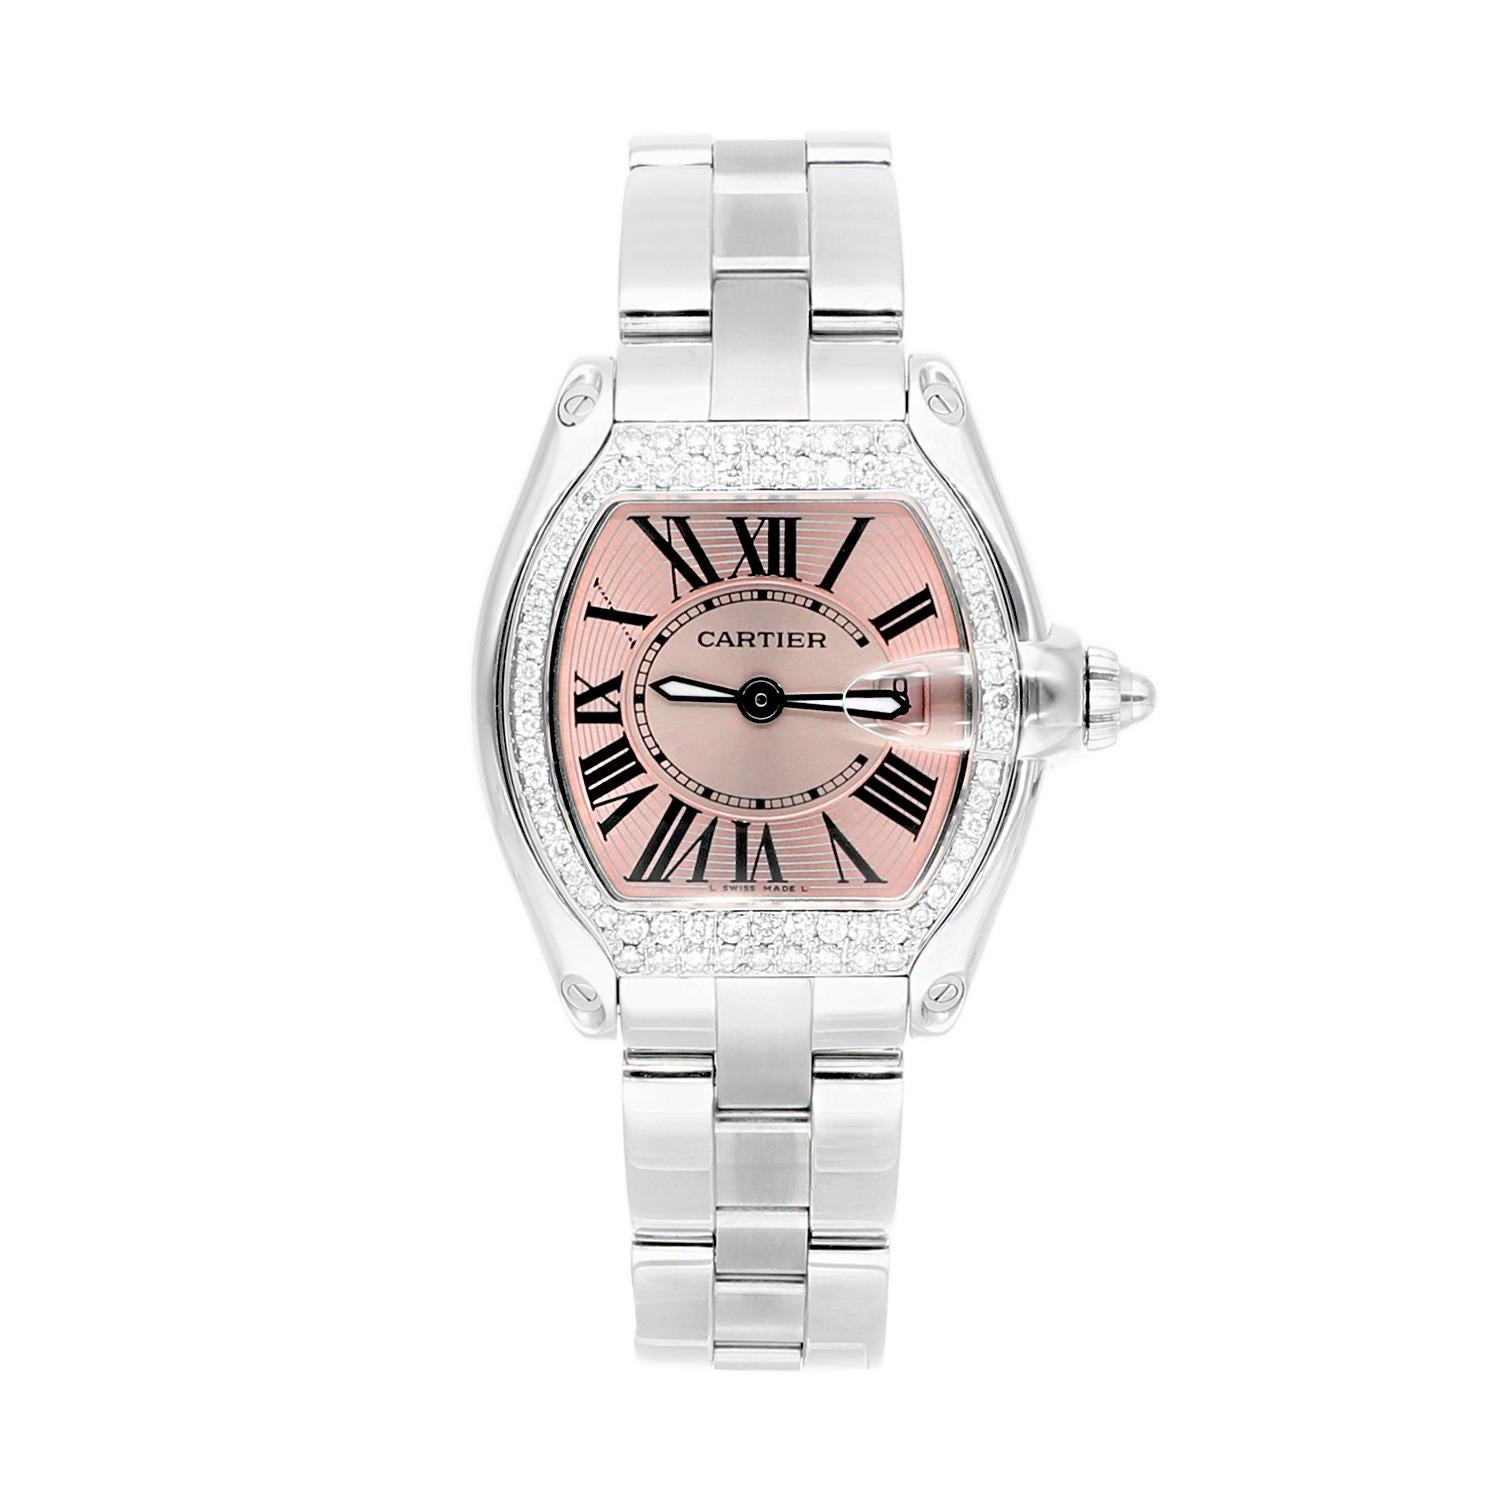 
Description
Cartier Roadster Small Ladies Pink Dial Stainless Steel Watch with Diamond Bezel
This watch has been professionally polished, serviced and is in excellent overall condition. There are absolutely no visible scratches or blemishes.